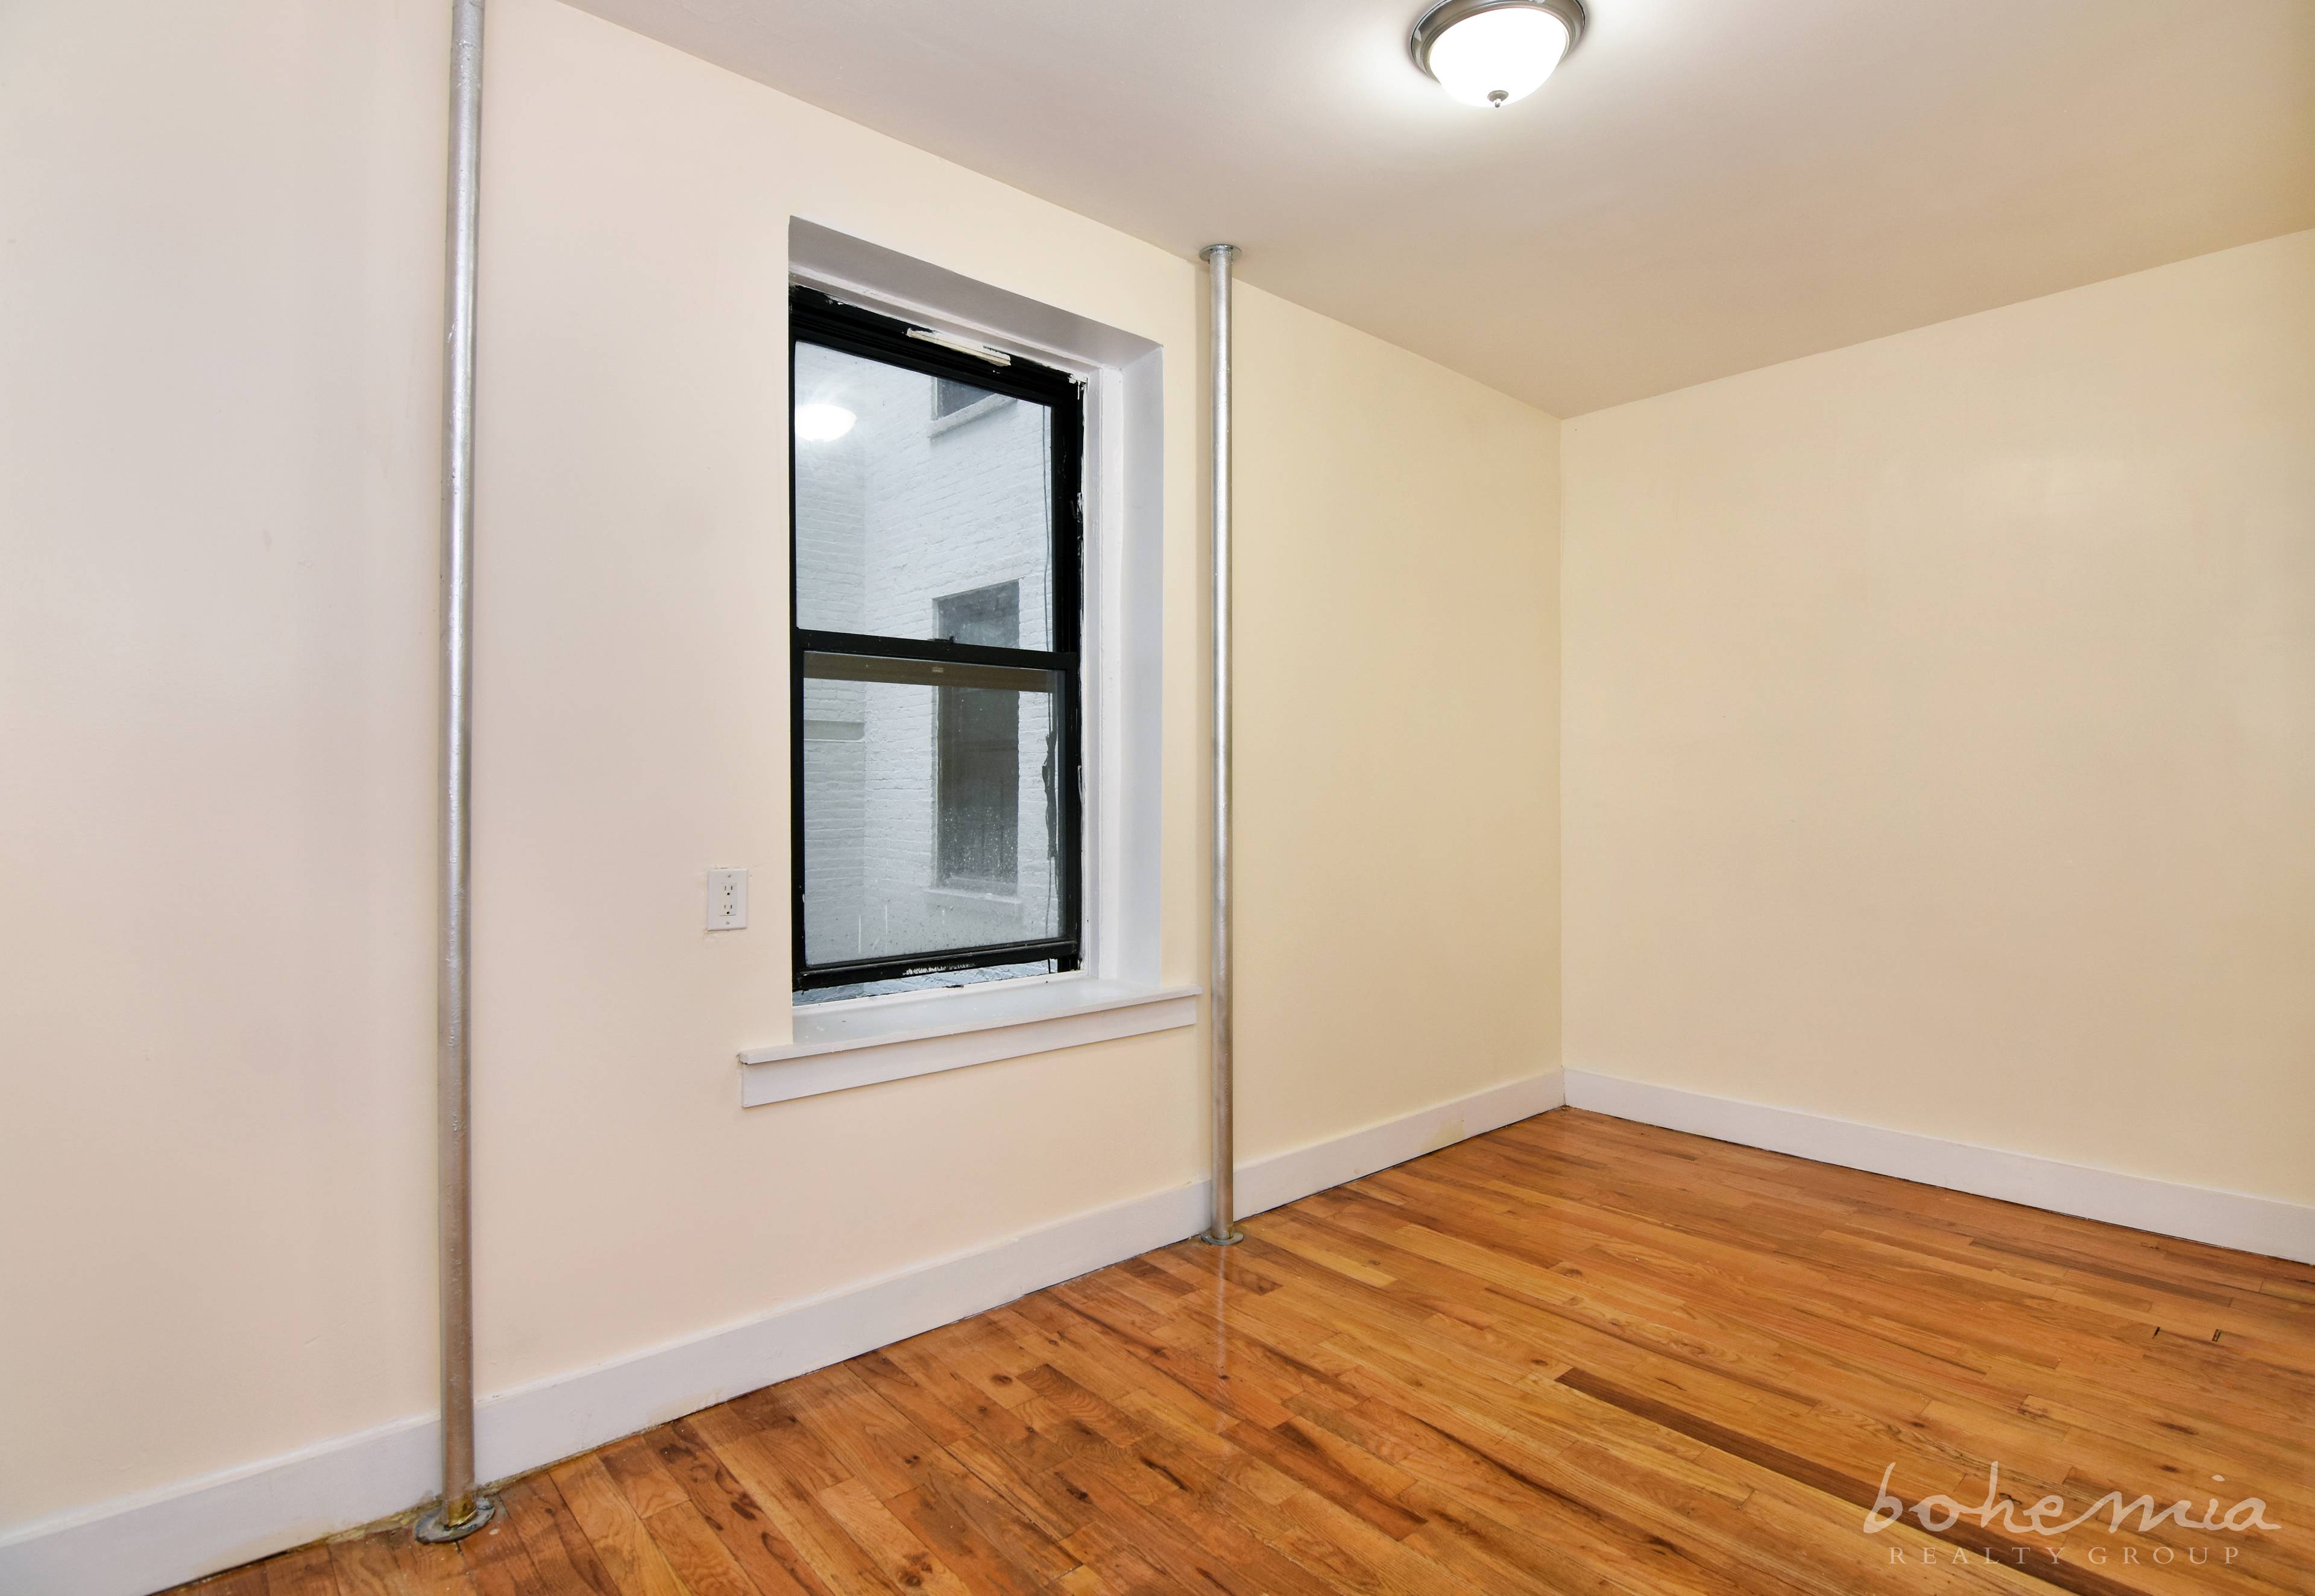 Do not miss the opportunity to lease this amazing 3 bedroom unit with lots of lights, renovated kitchen, and plenty of closet space in a well maintained building with an ...